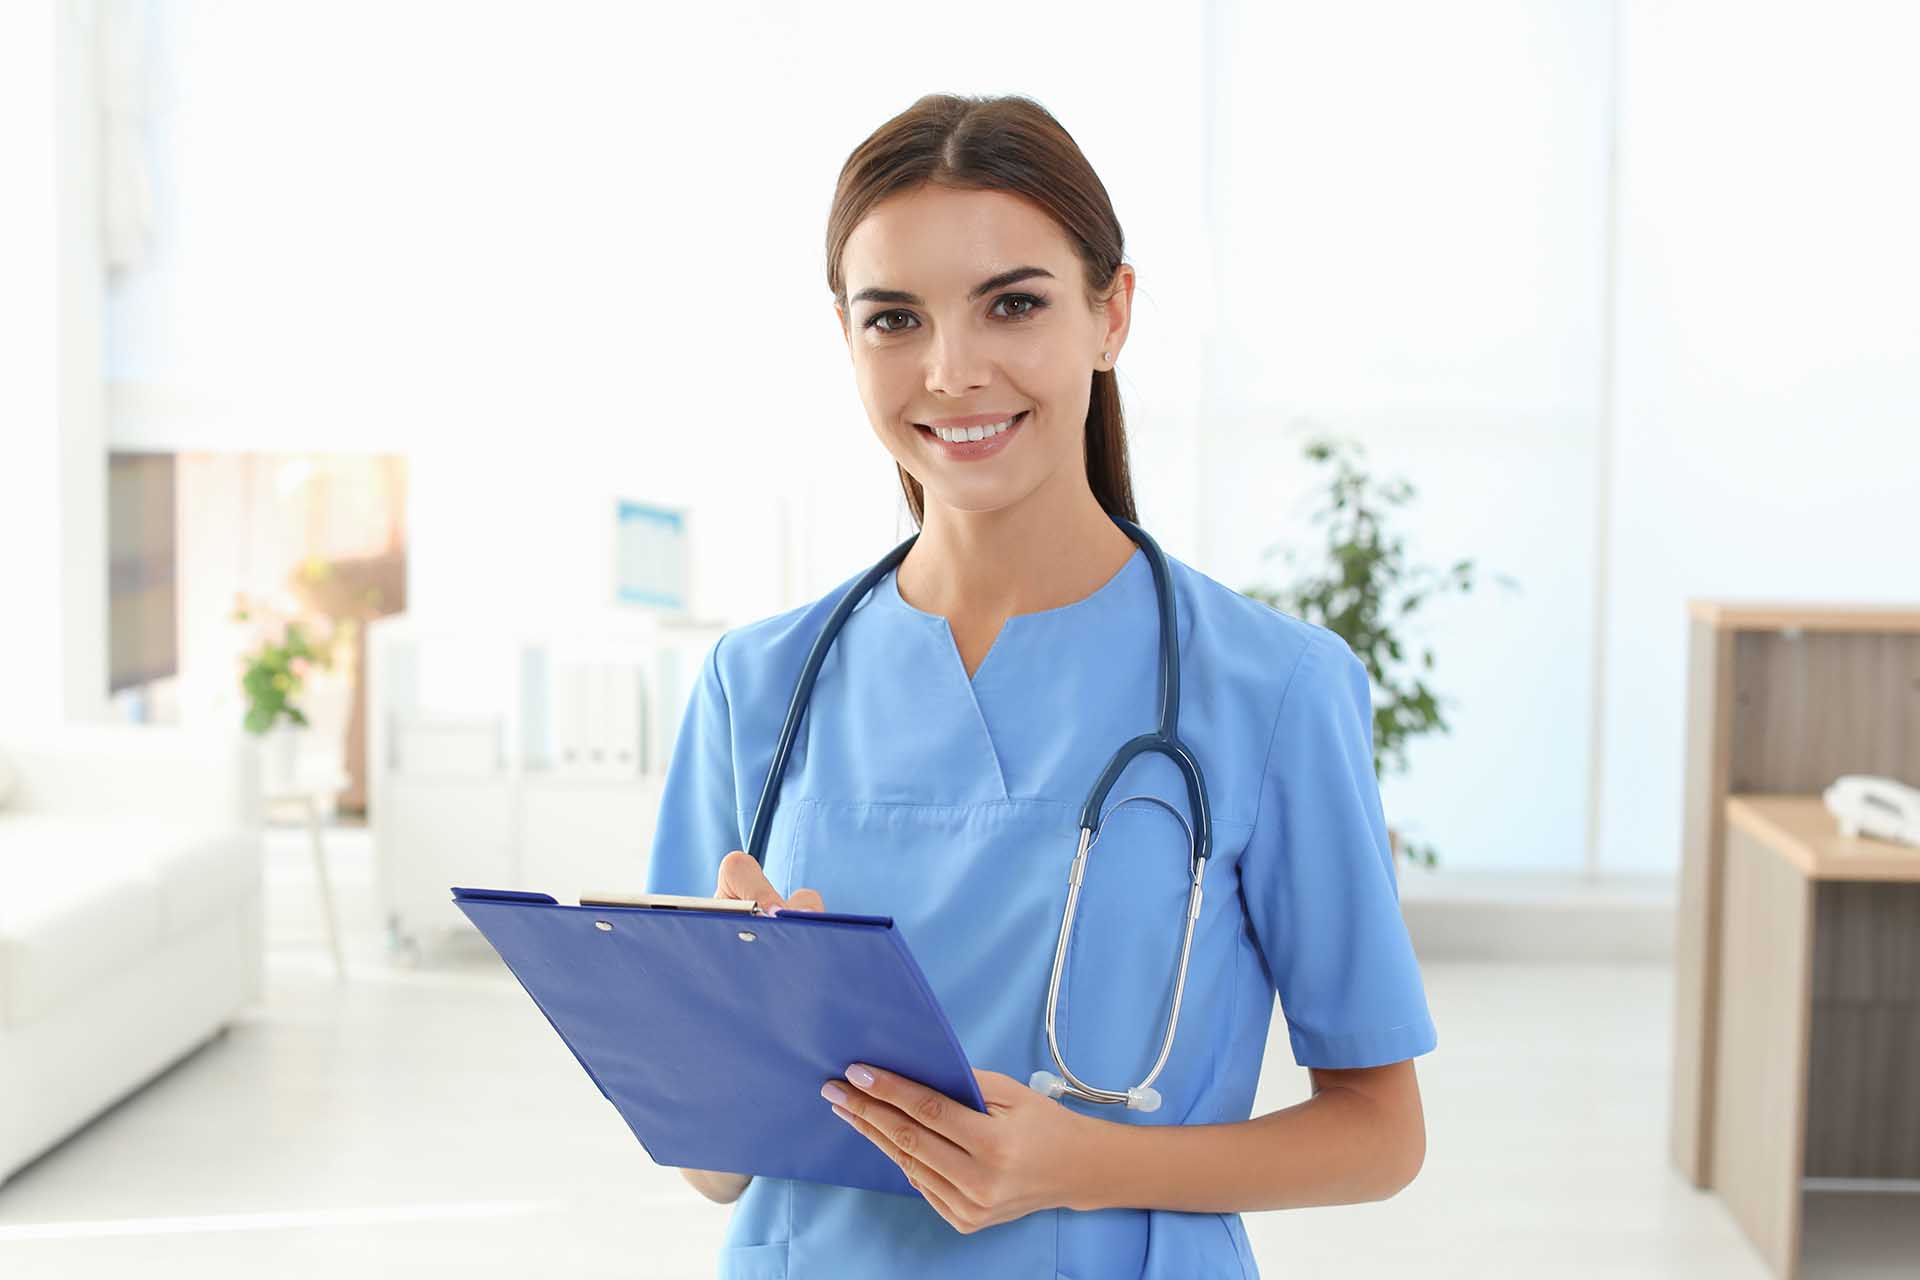 What Electronic Technology Does The Medical Assistant Use To Communicate With Others